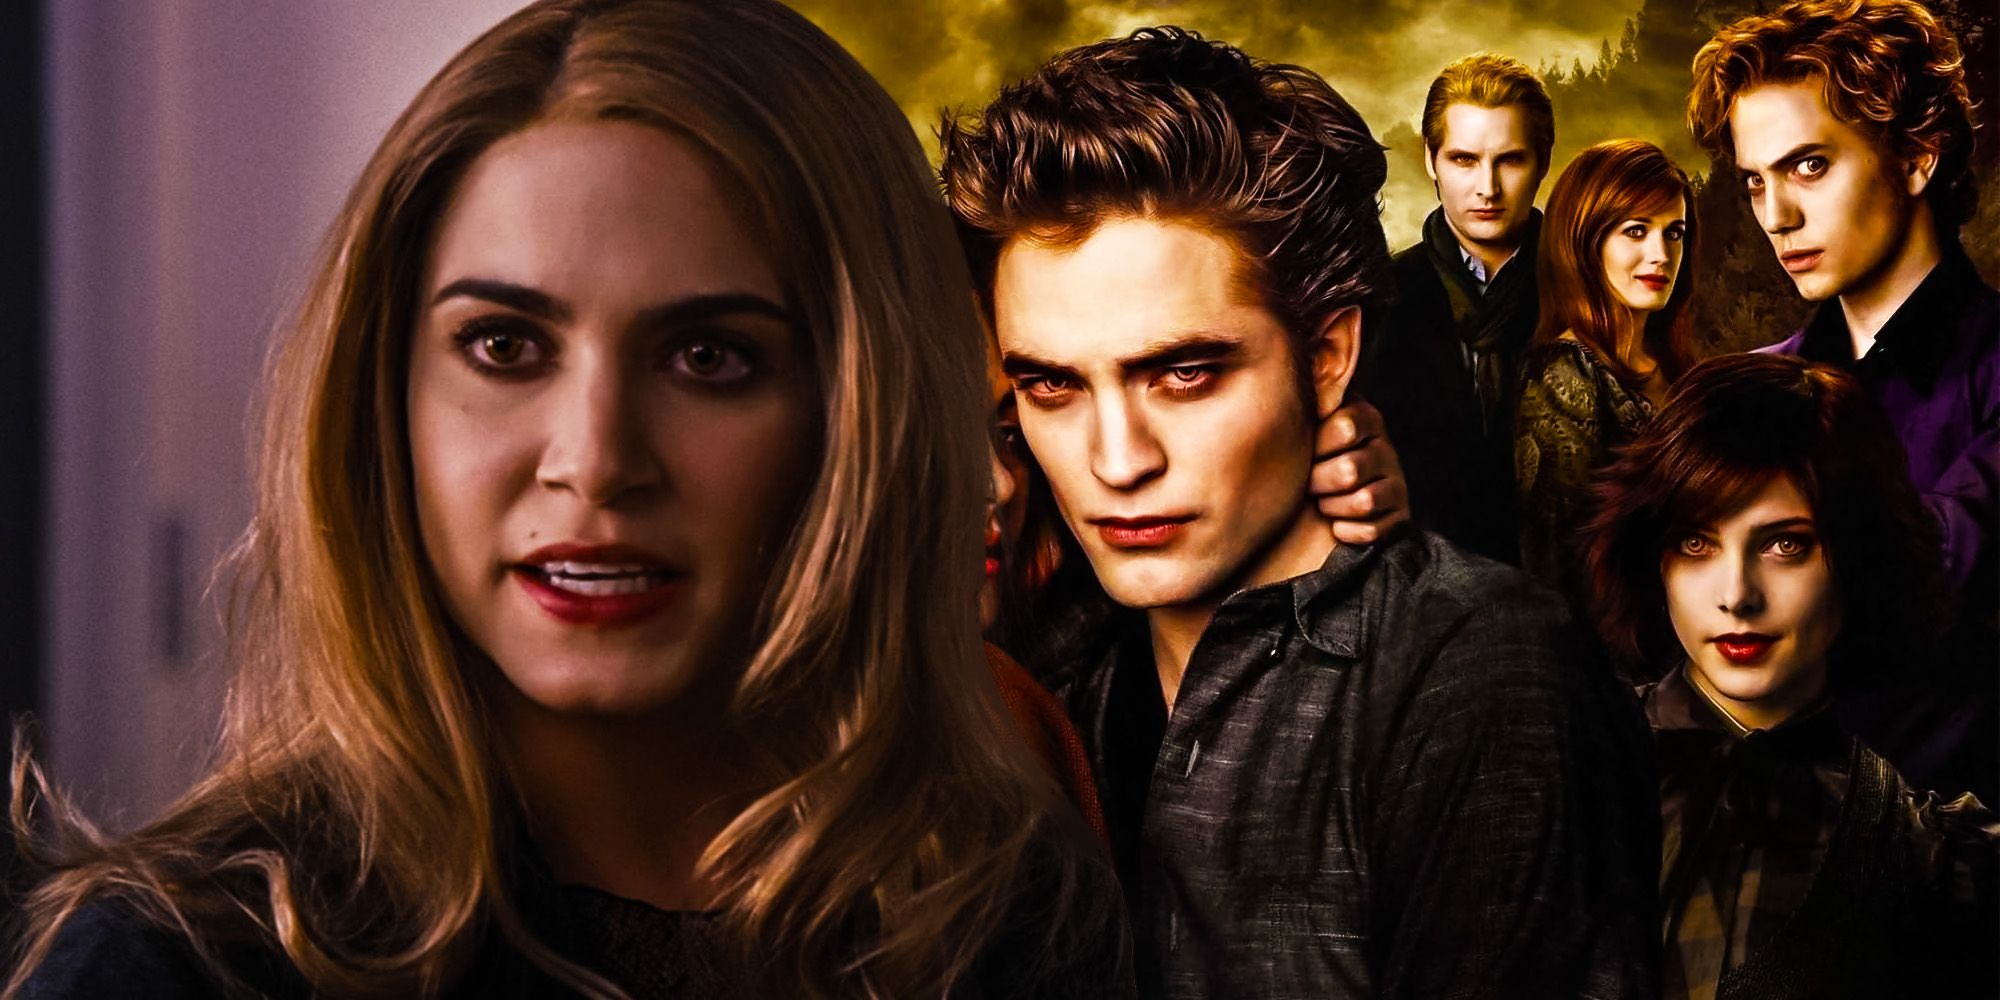 Why Rosalie Cullen Has No Powers In The Twilight Movies